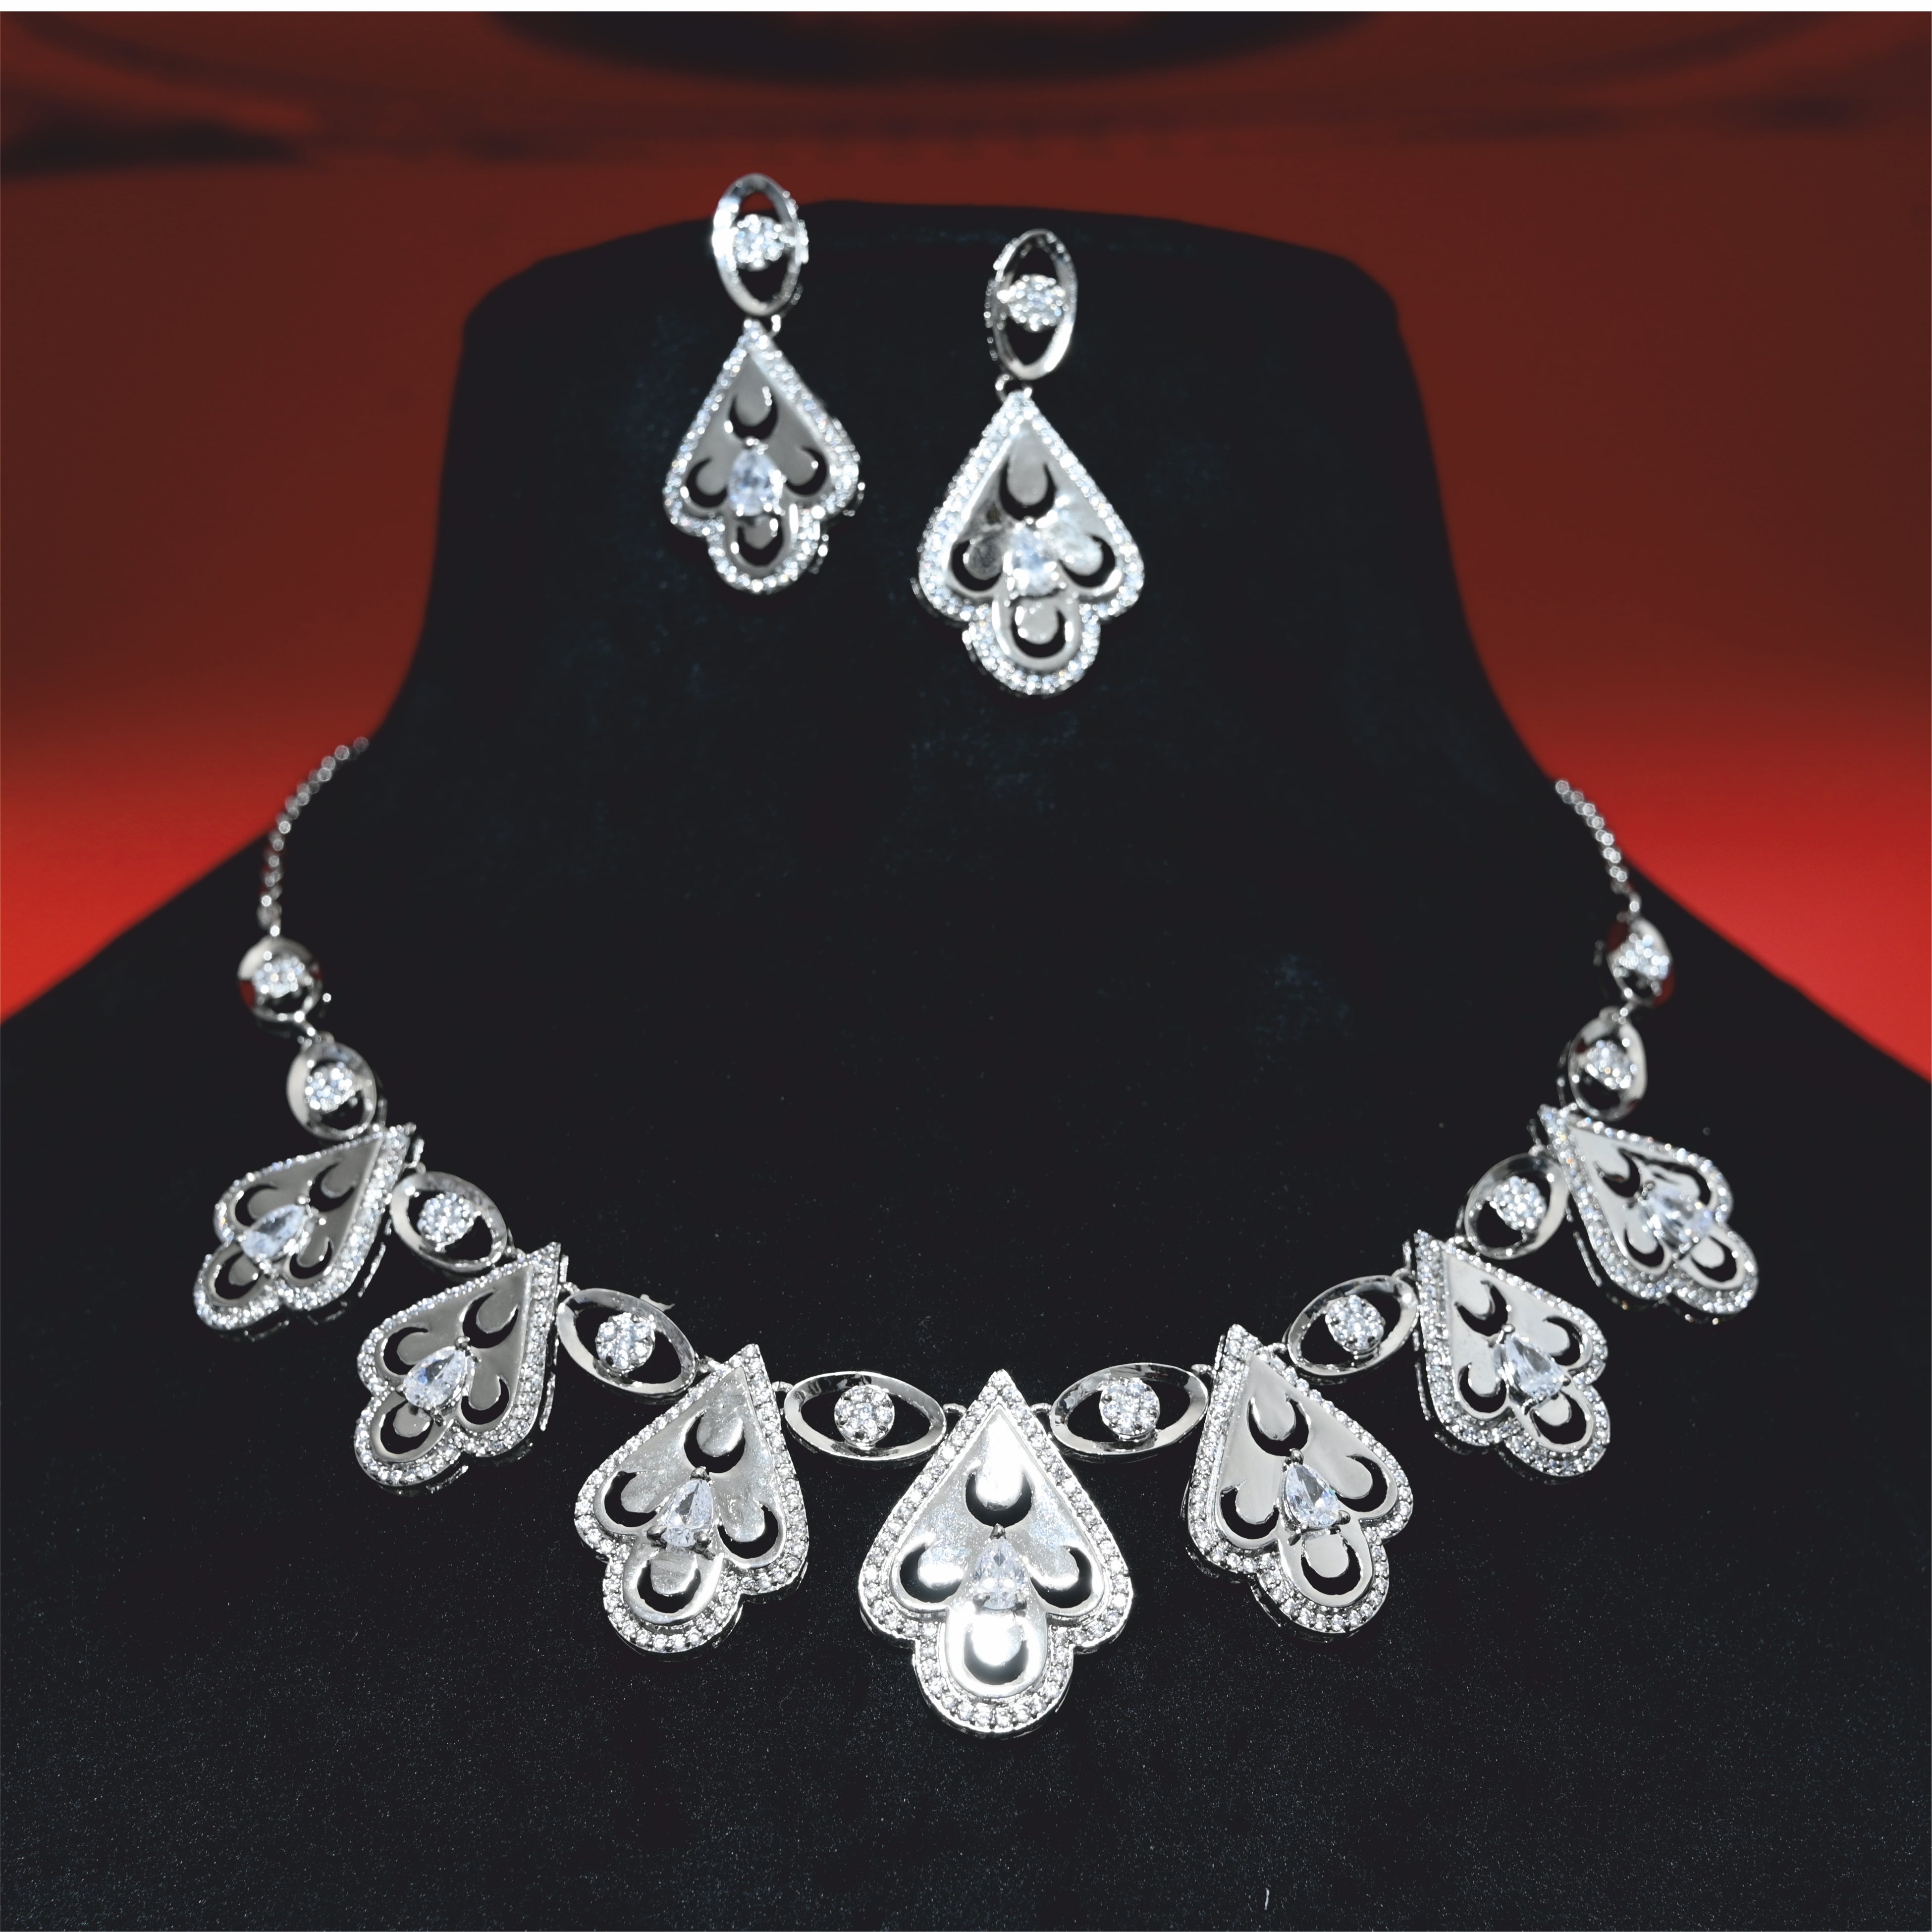 Silver Necklace & Earrings Set With Swiss Zirconia Stones